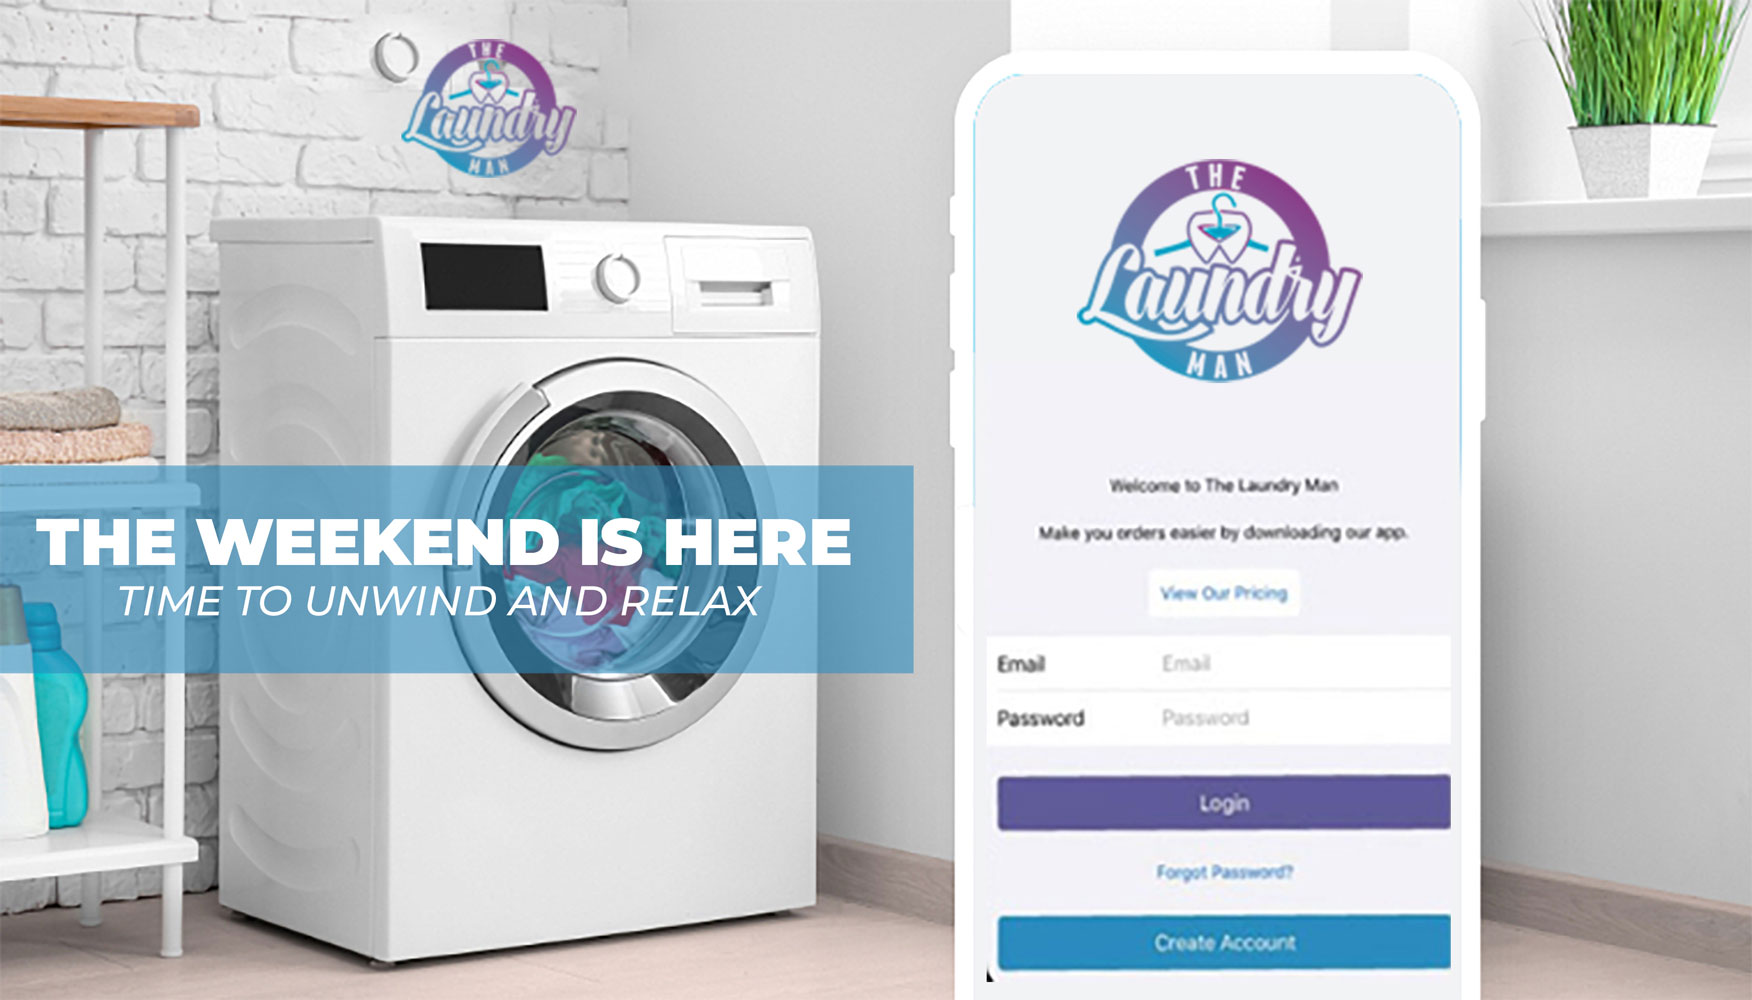 Laundry Service Manchester